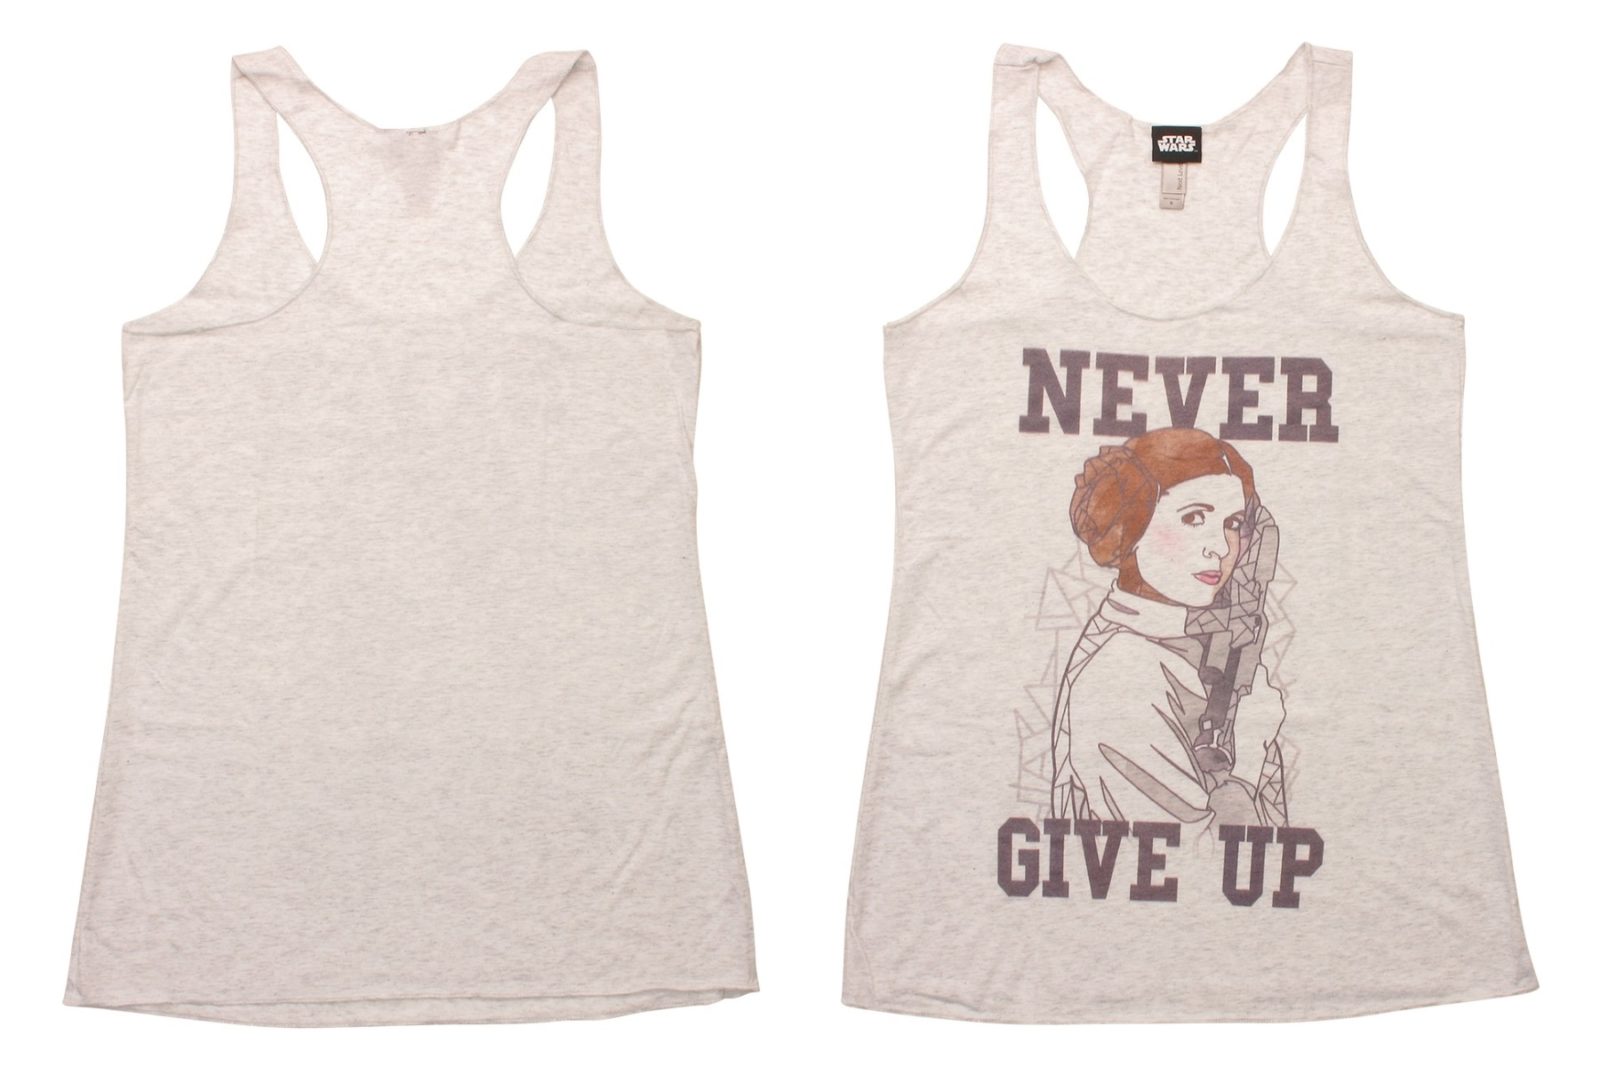 Women's Star Wars Princess Leia Never Give Up tank top at Stylin Online